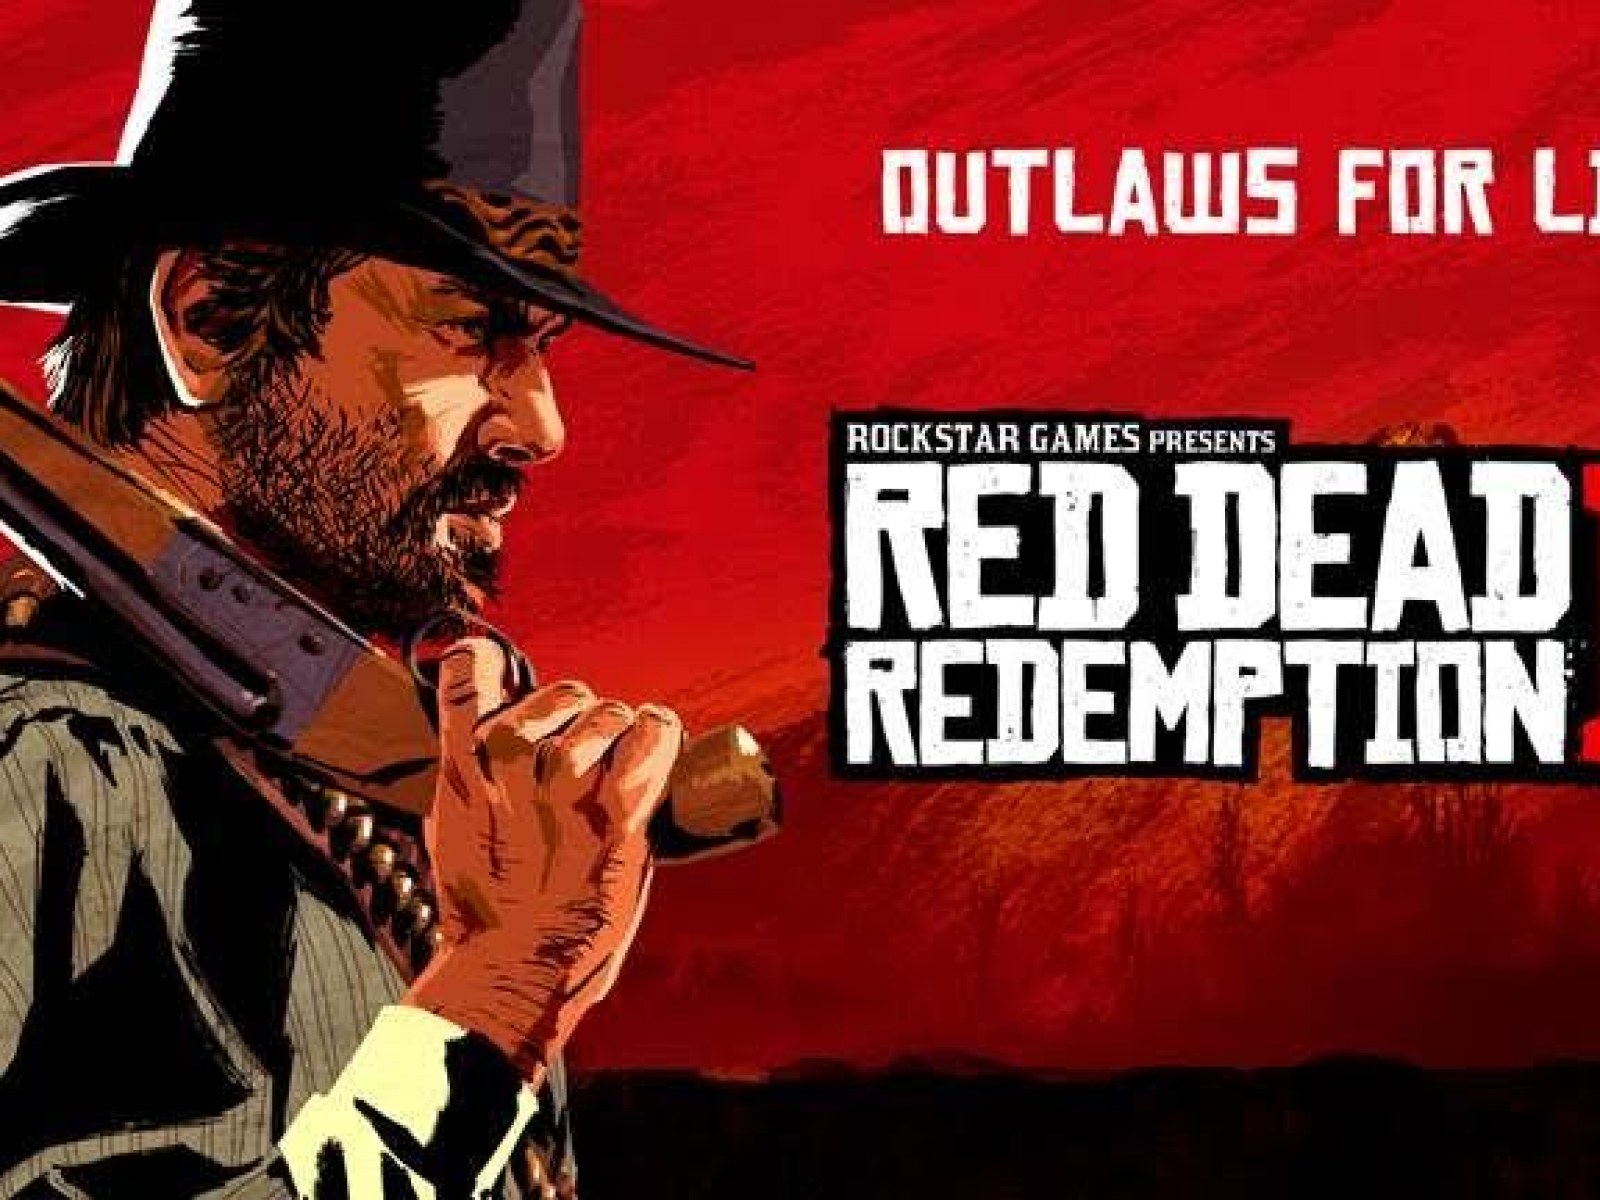 Red Dead Redemption 2 for Playstation 4 by Rockstar Games - trailer,  release date and latest gossip about Rockstar's new game